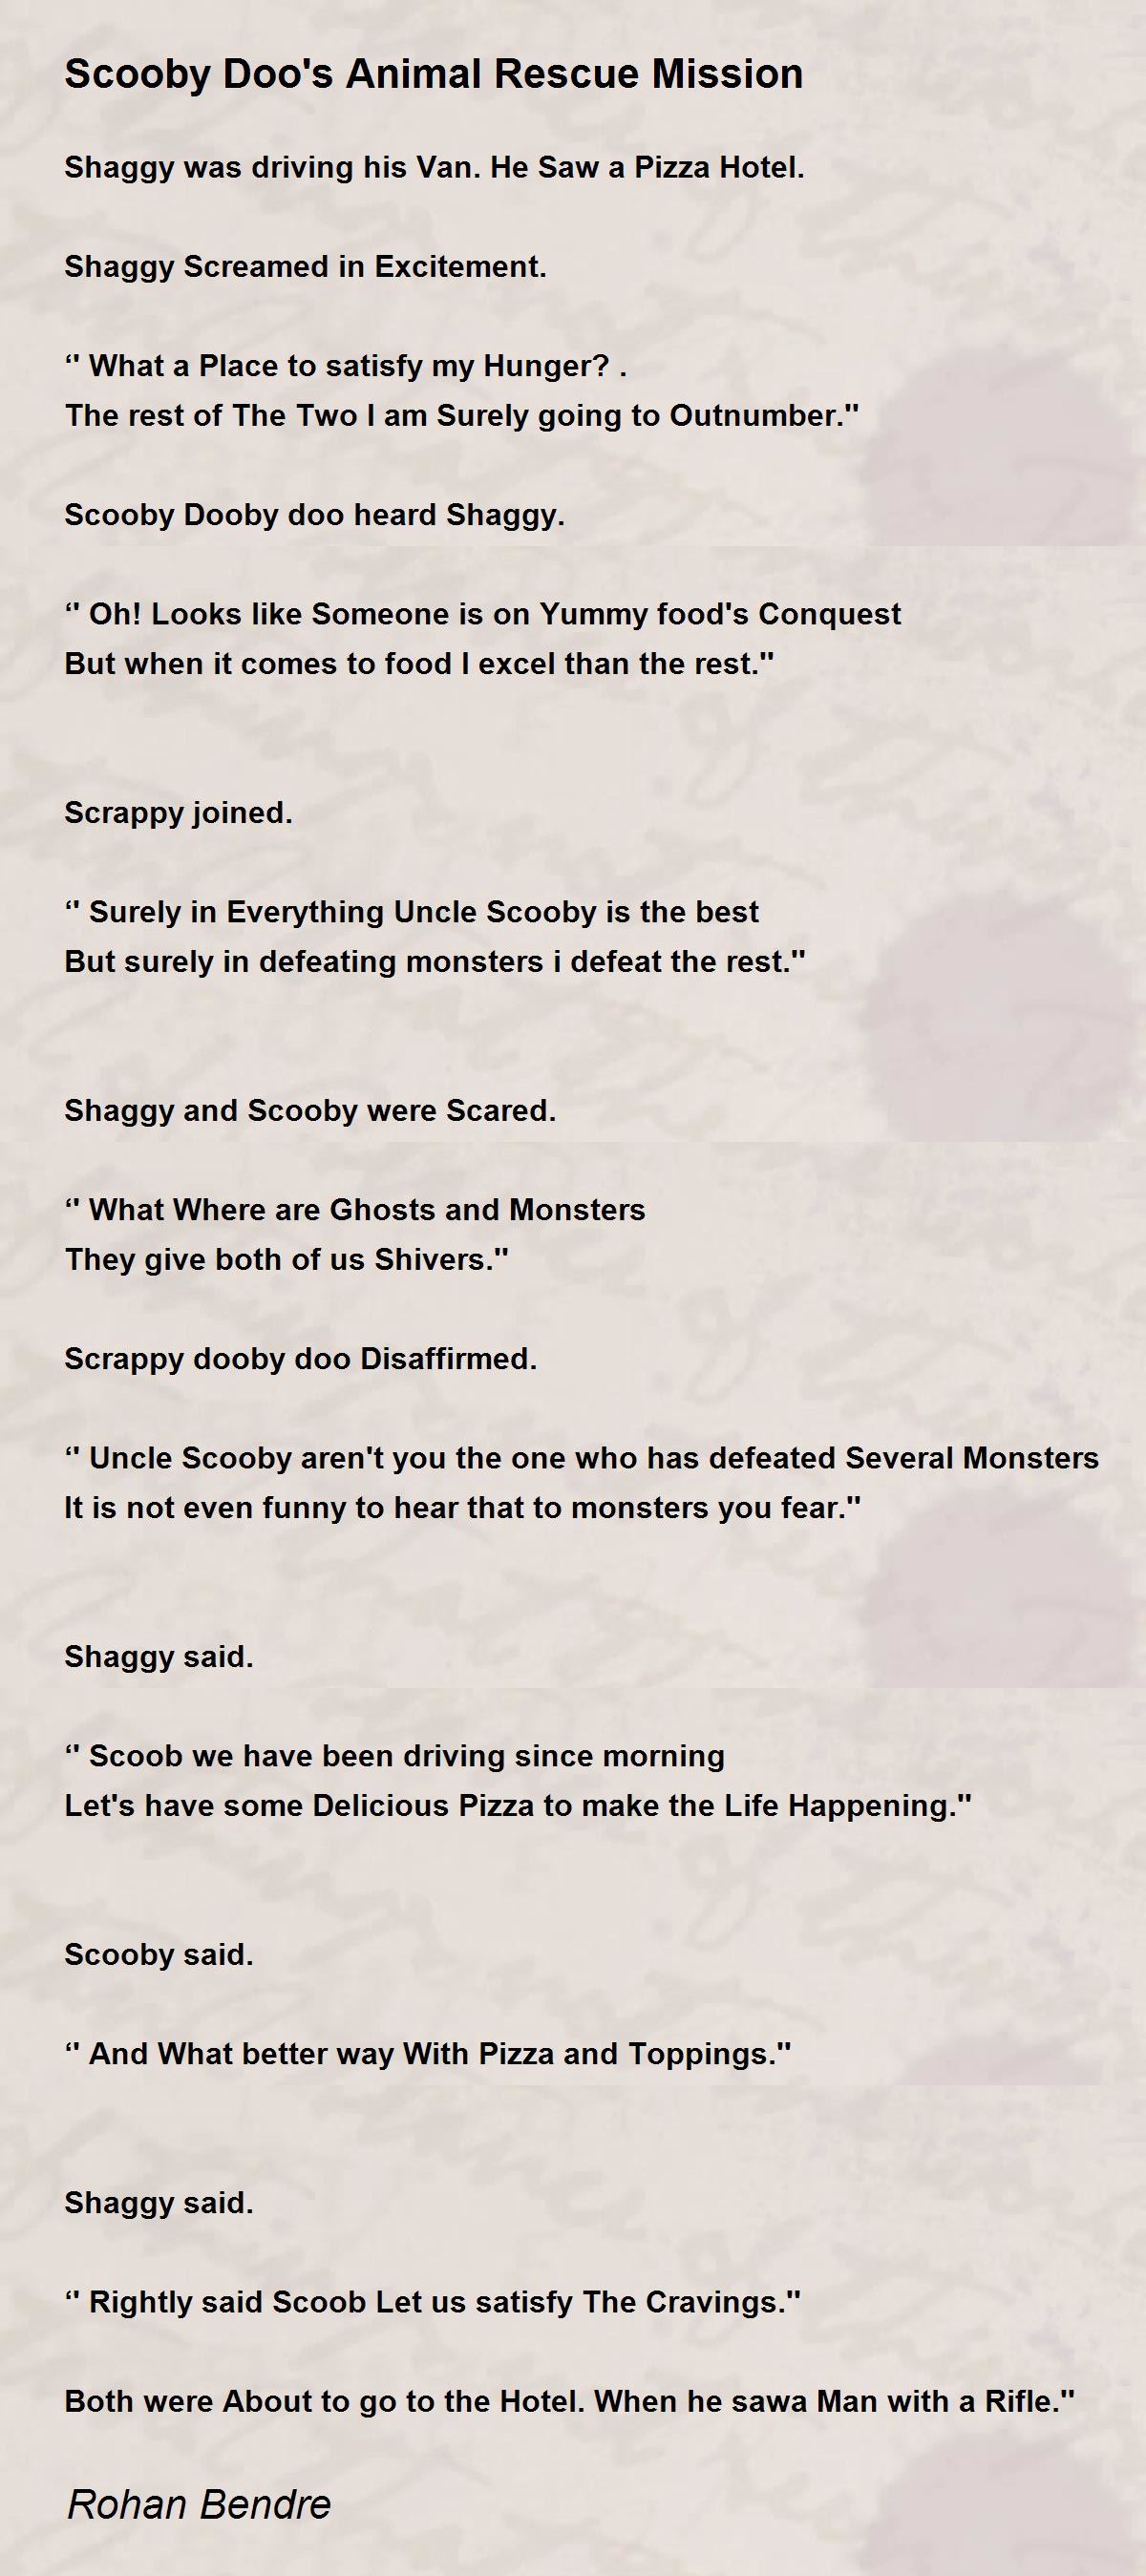 Scooby Doo's Animal Rescue Mission - Scooby Doo's Animal Rescue Mission Poem  by Rohan Bendre